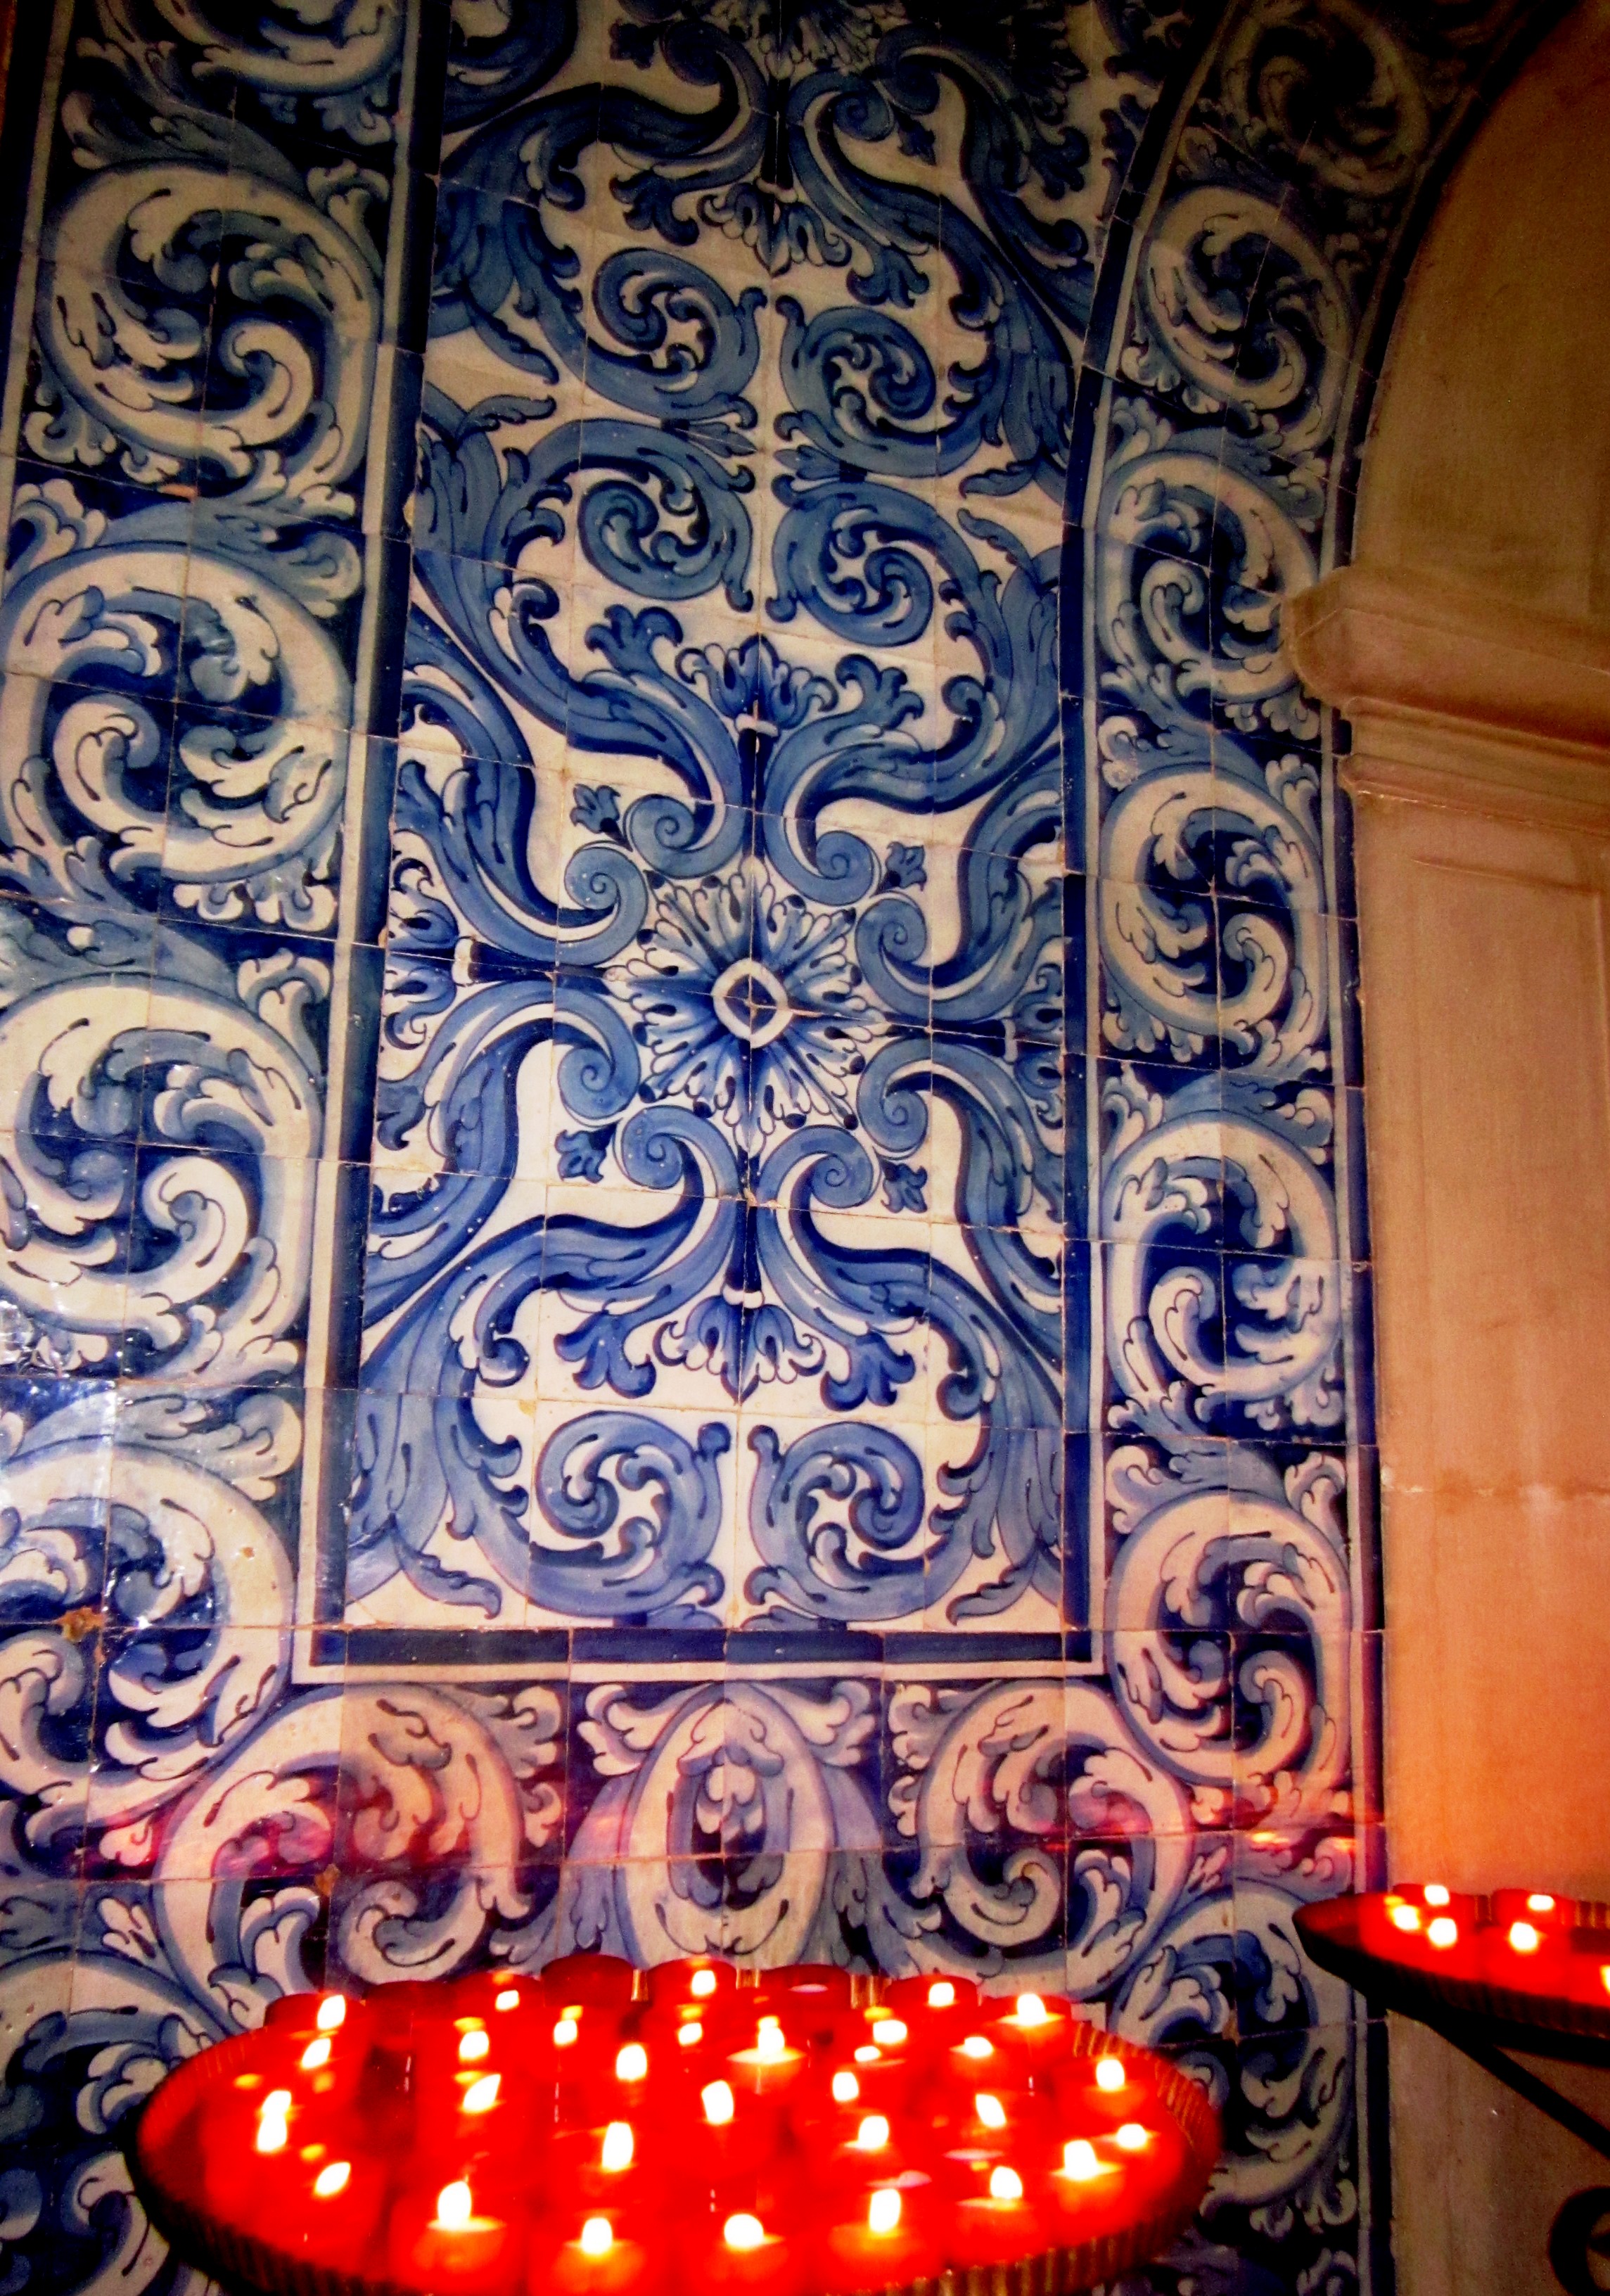 Tiles by candlelight - Obidos, Portugal